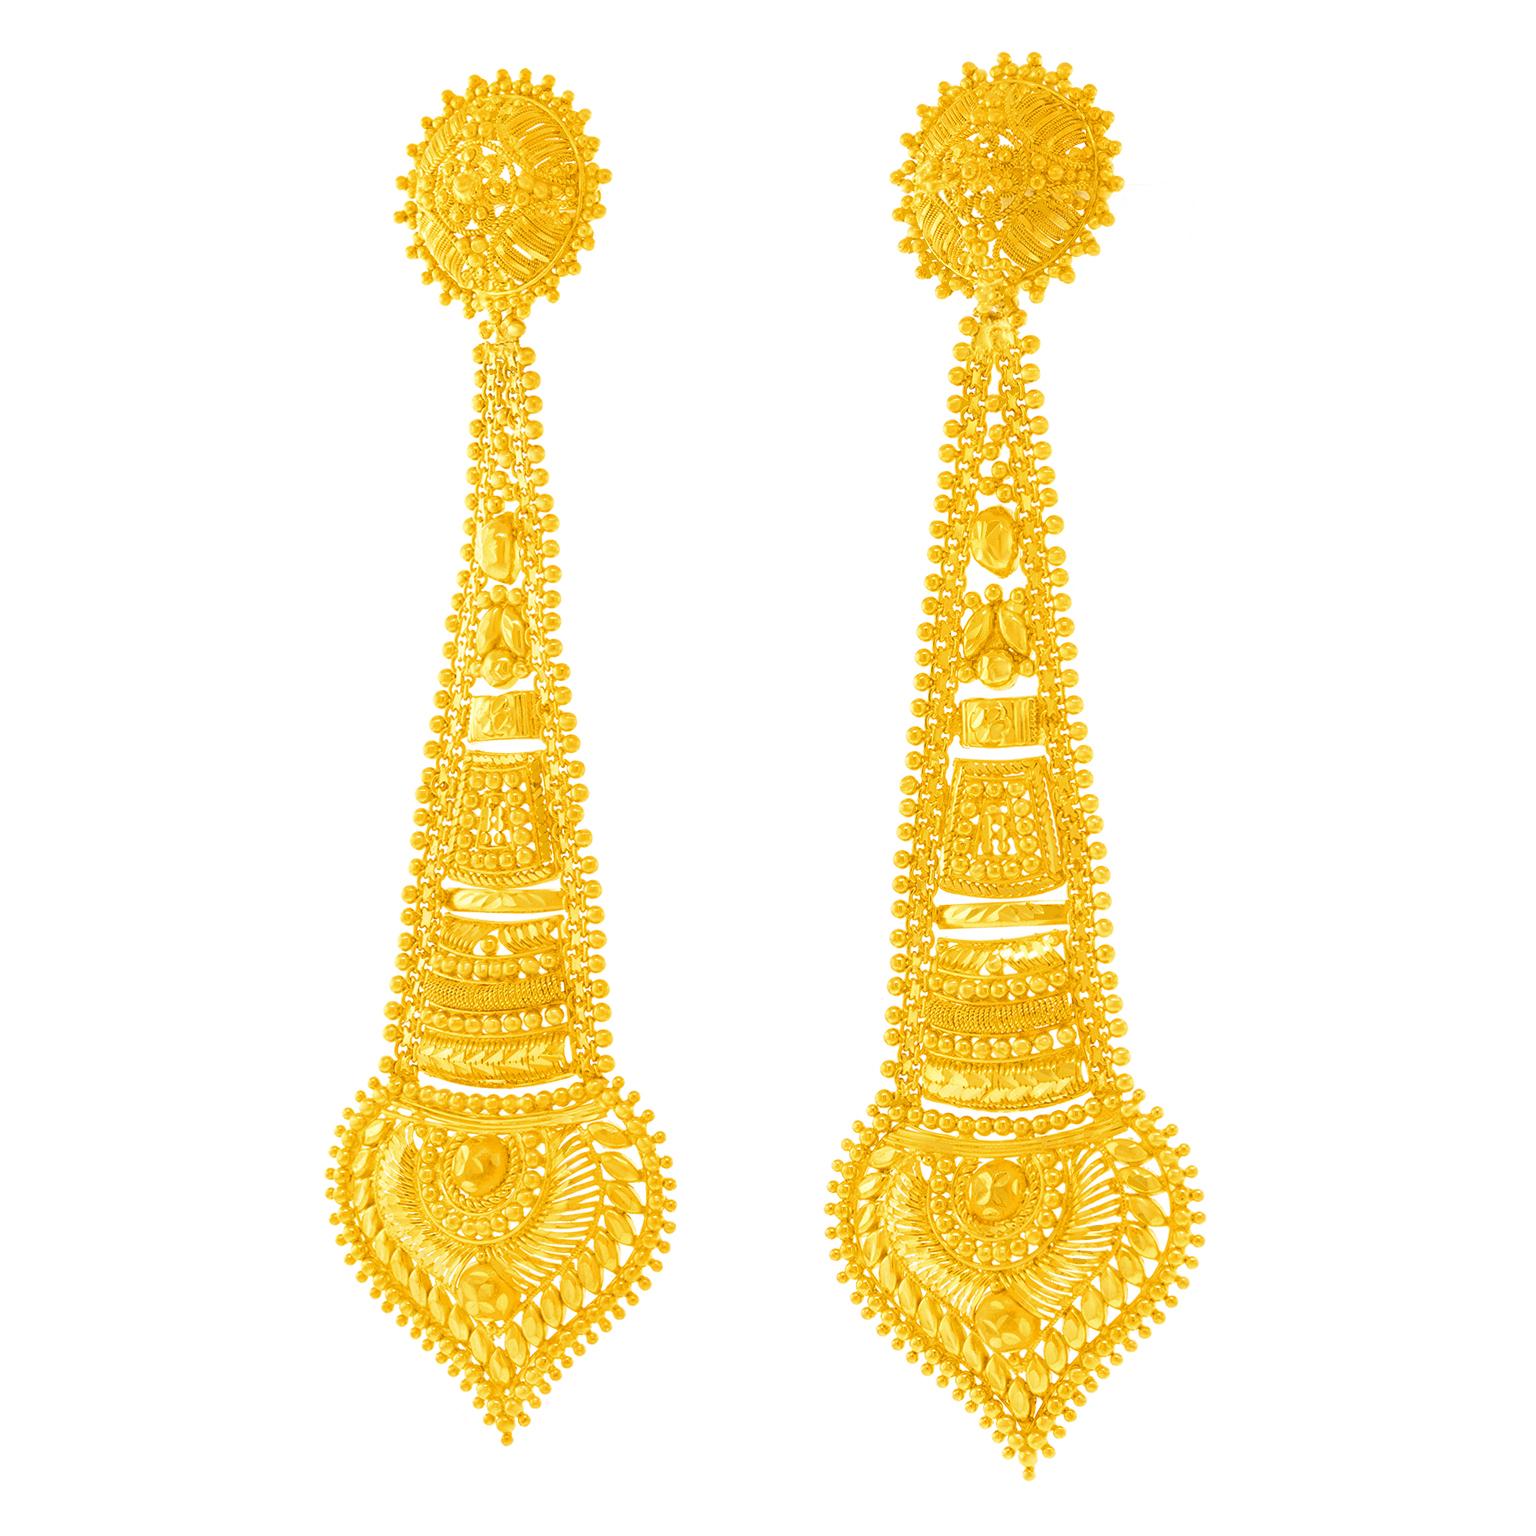 Magnificent High-Karat Gold Earrings c1950s India In Excellent Condition For Sale In Litchfield, CT